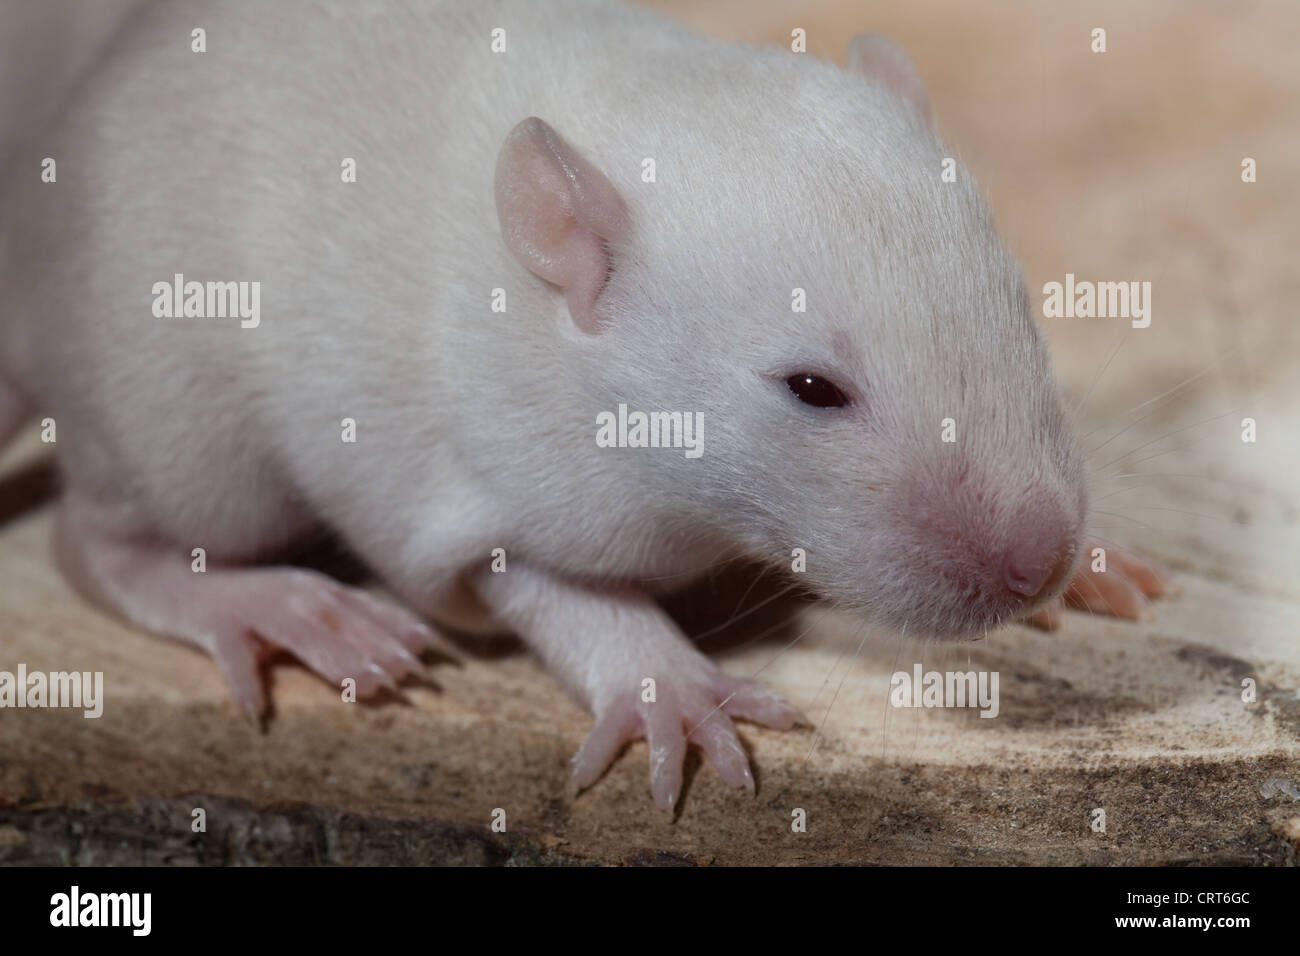 Domesticated Rats (Rattus norvegicus). 13 days old baby, 'pup' rat. Albino, showing pink eyes beginning to open for first time. Stock Photo